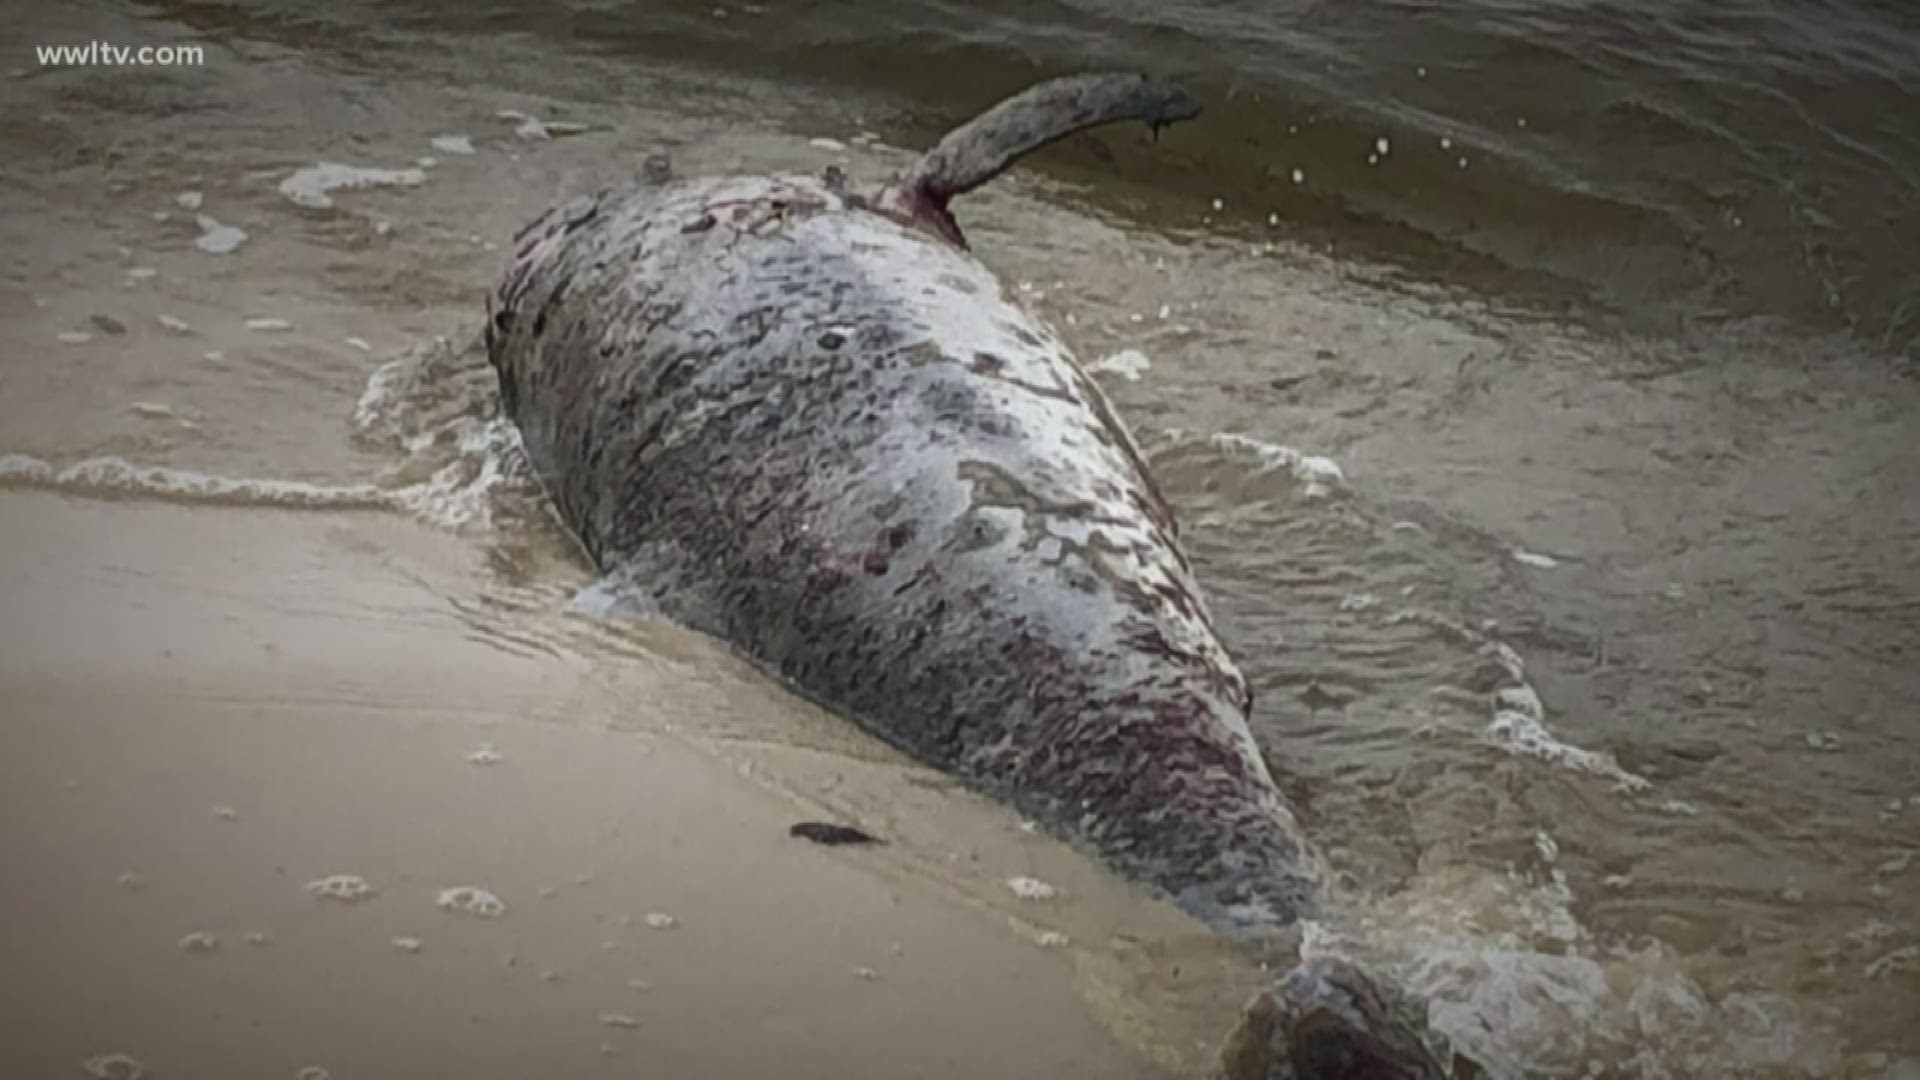 At the Institute for Marine Mammal Studies in Gulfport, Dr. Moby Solangi says dead dolphins are coming in from the Mississippi Sound at an alarming rate.